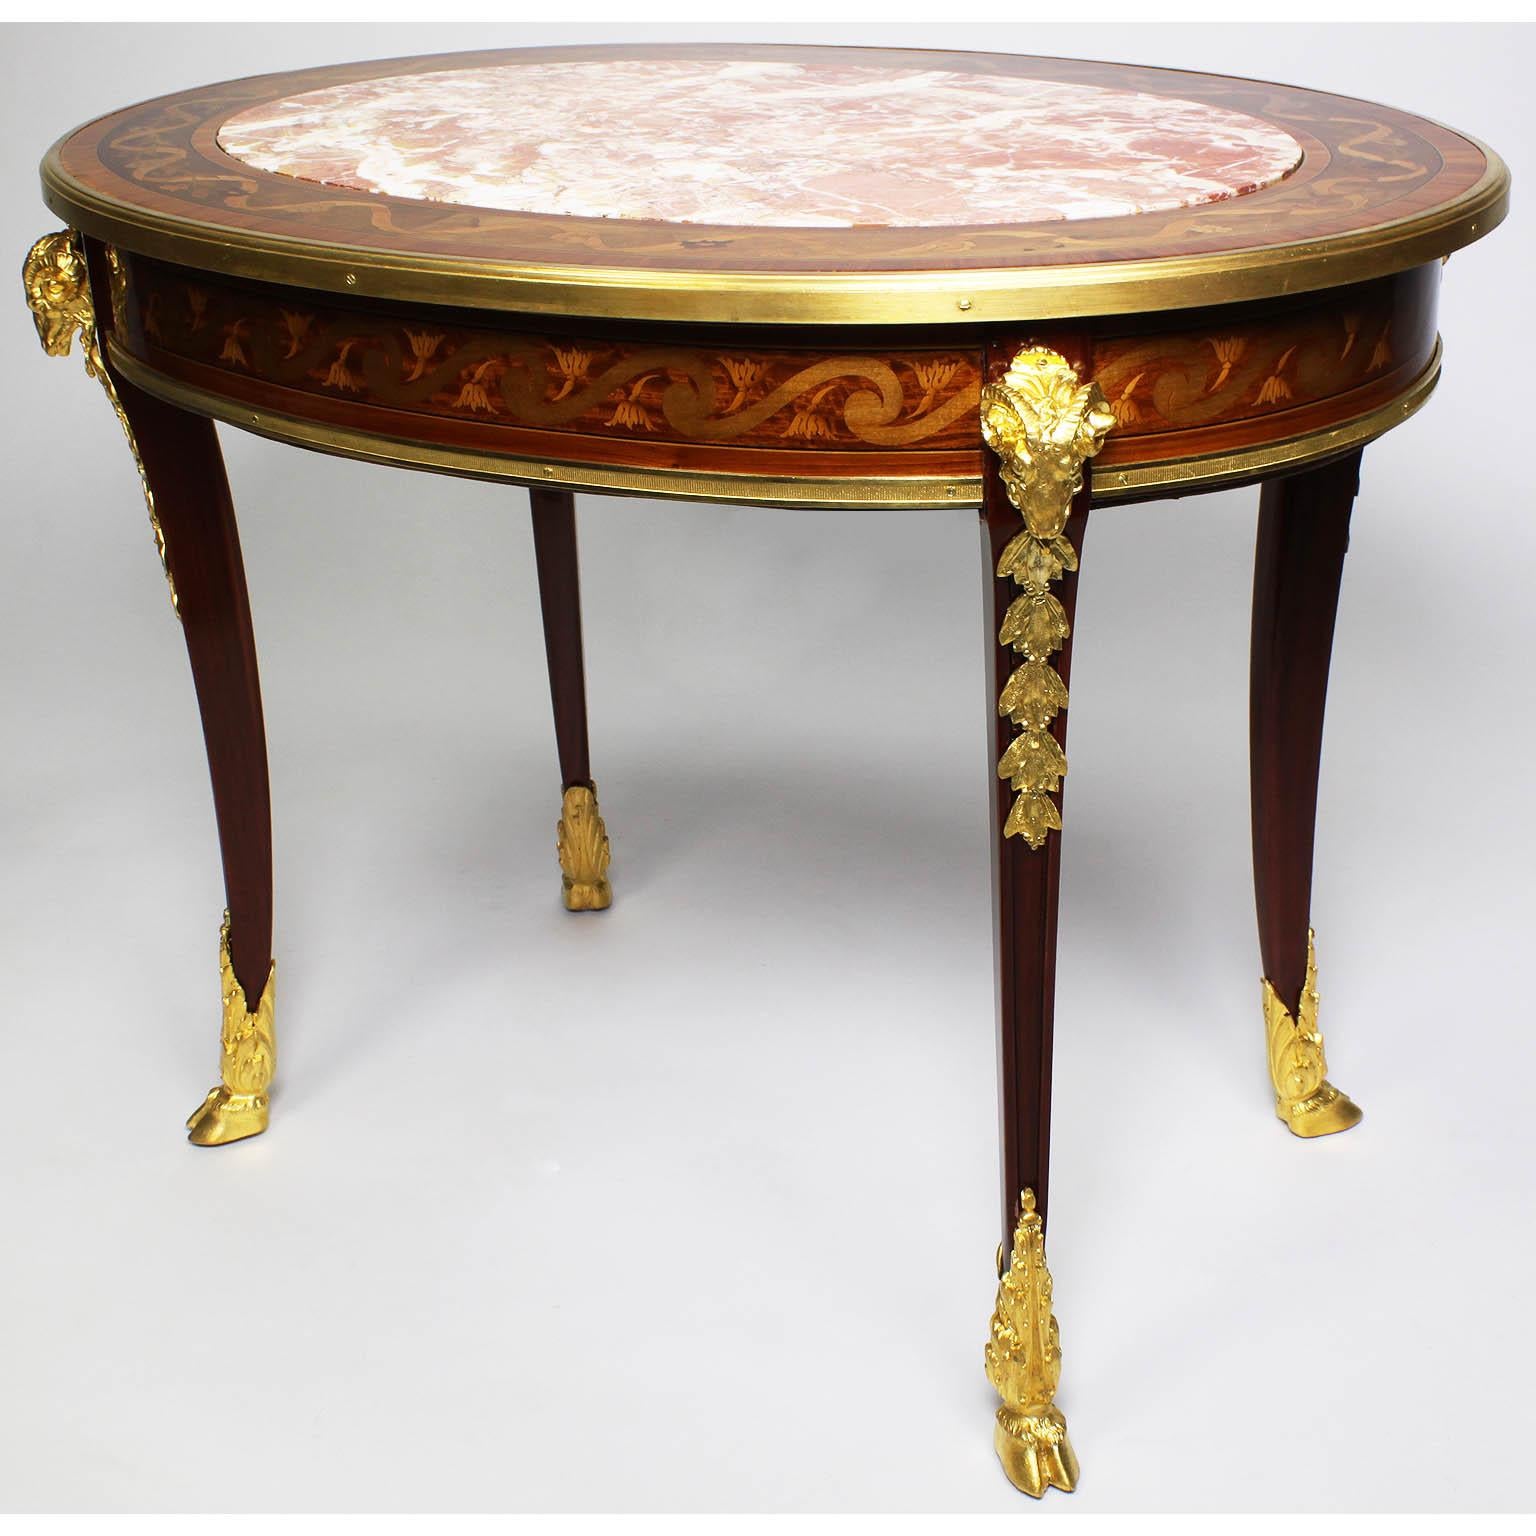 A very fine French Louis XV style Belle Époque Figural ormolu-mounted mahogany, tulipwood and fruitwood marquetry oval coffee table with marble top, in the manner of François Linke (1855-1946). The low table with a finely inlaid border top and apron